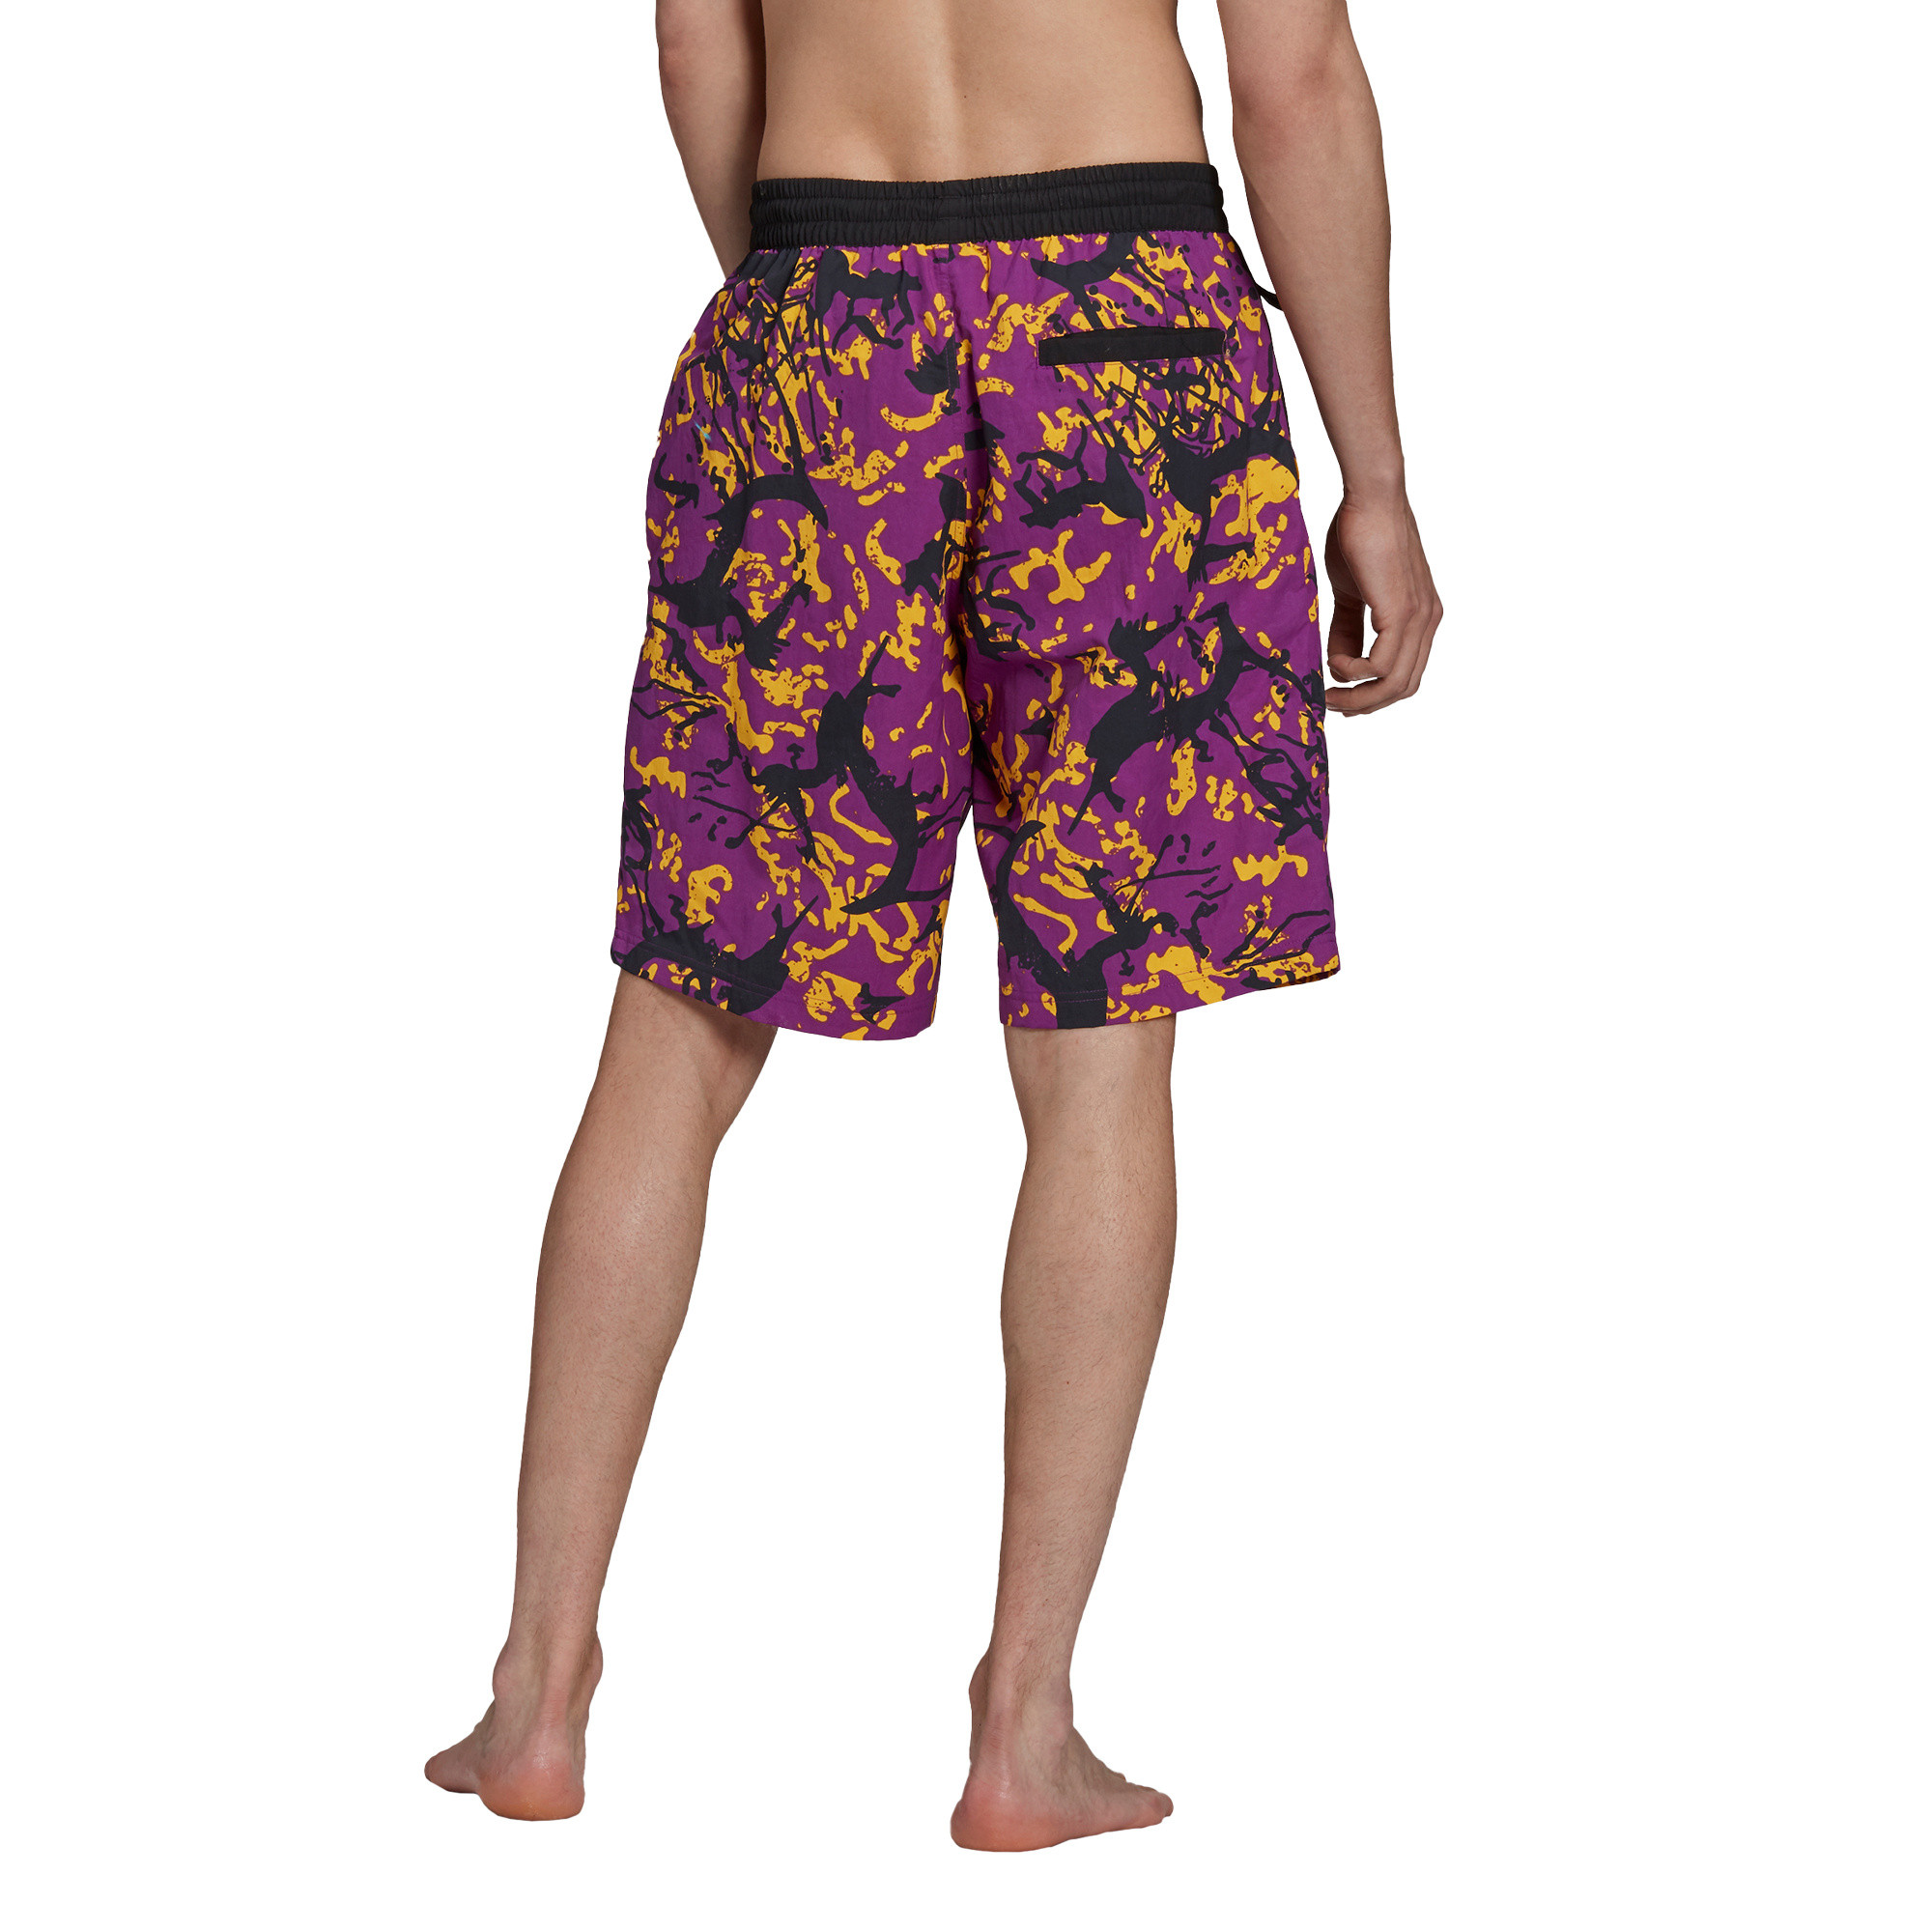 adidas Adventure Archive Printed Woven Shorts, Multicolor, large image number 4